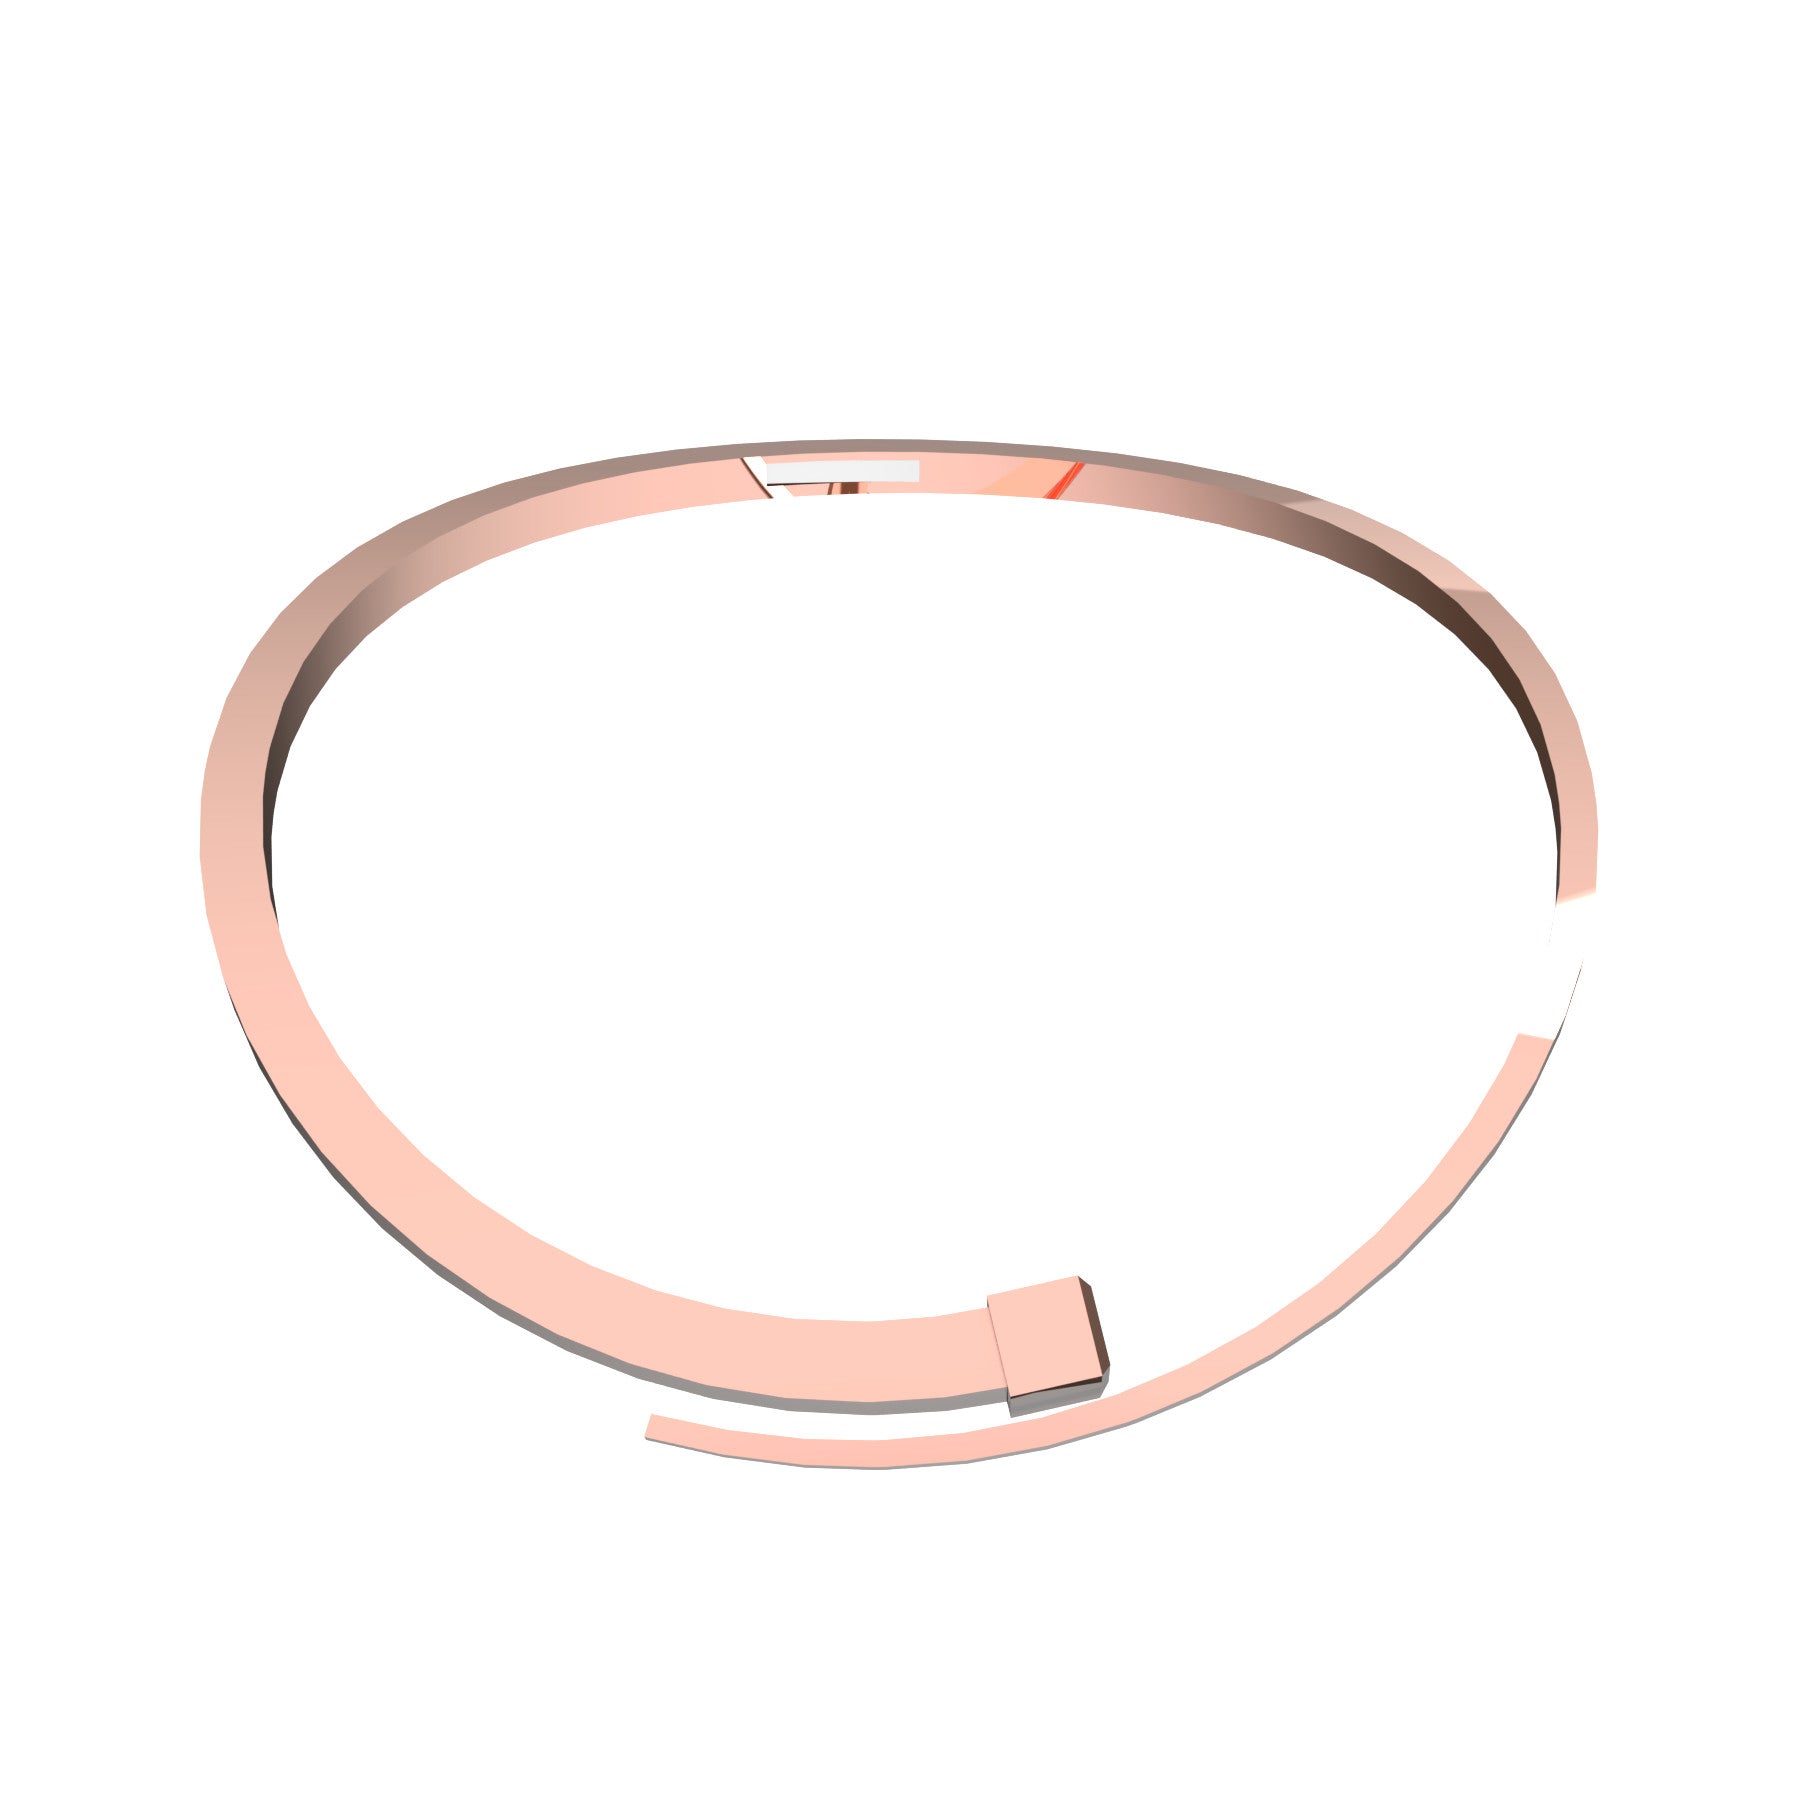 lucky nail necklace, 18 K pink gold, weight about 55,3 to 71,0 g (1.95 to 2.50 oz), width 8 mm max